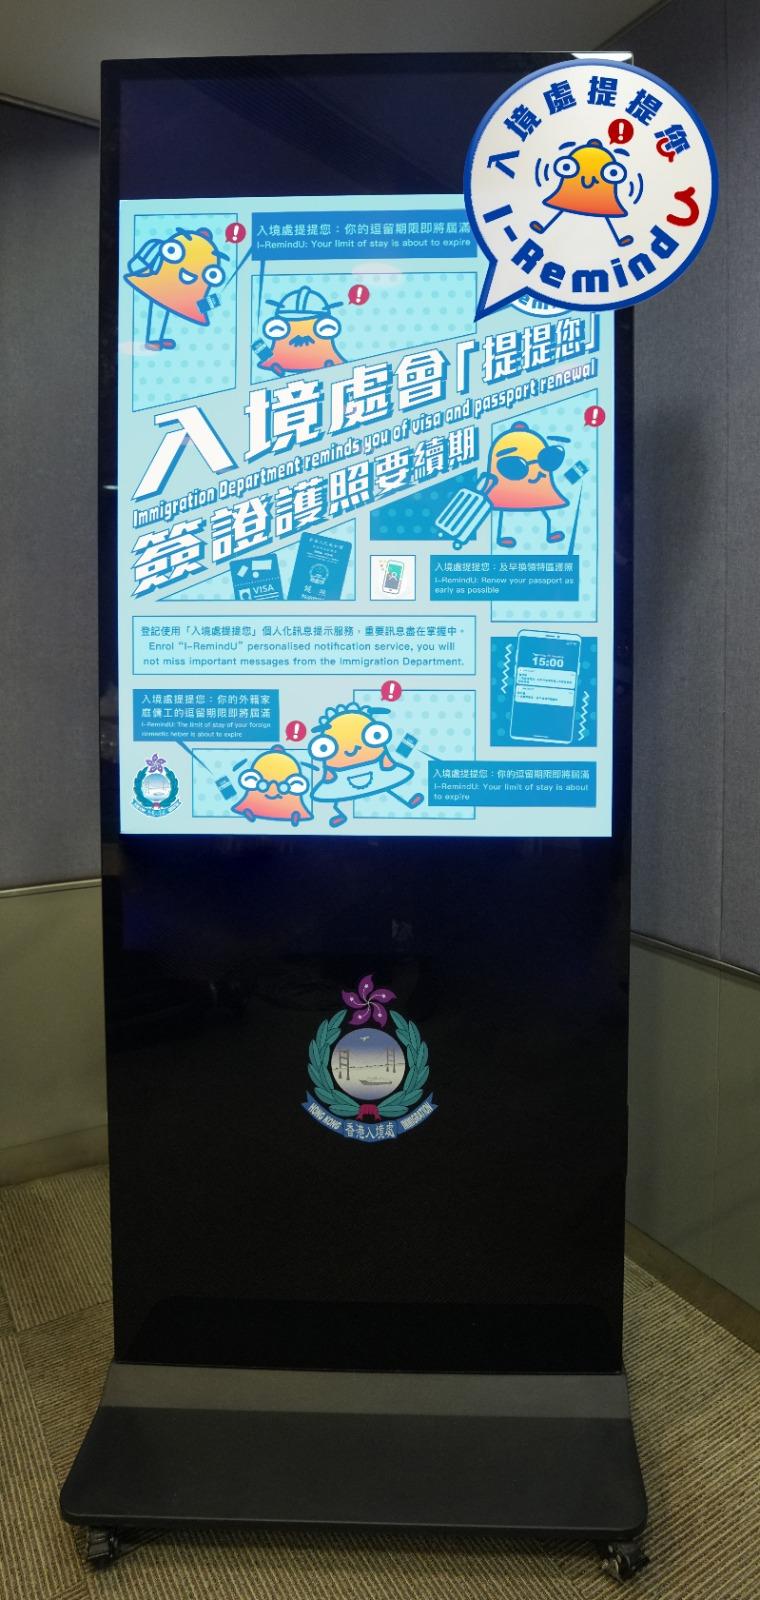 Photo shows an electronic poster of the I-RemindU Service.